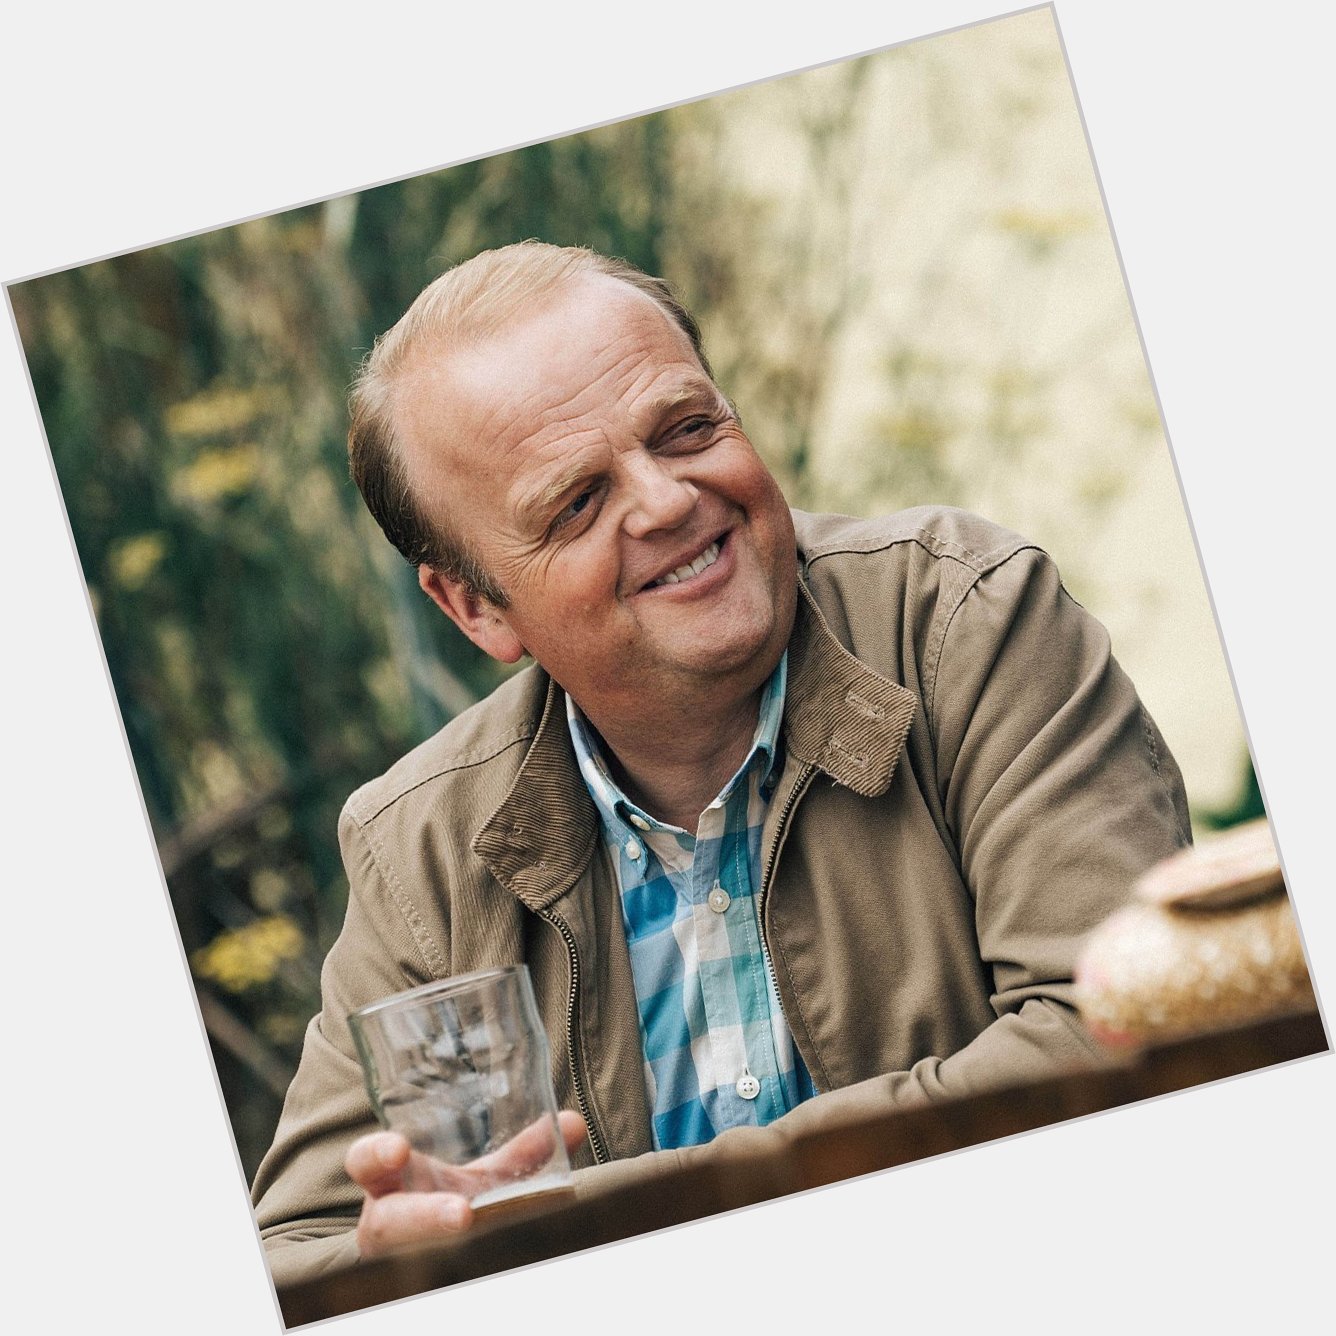 Happy birthday to one of the most versatile, talented actors in the world Toby Jones!   